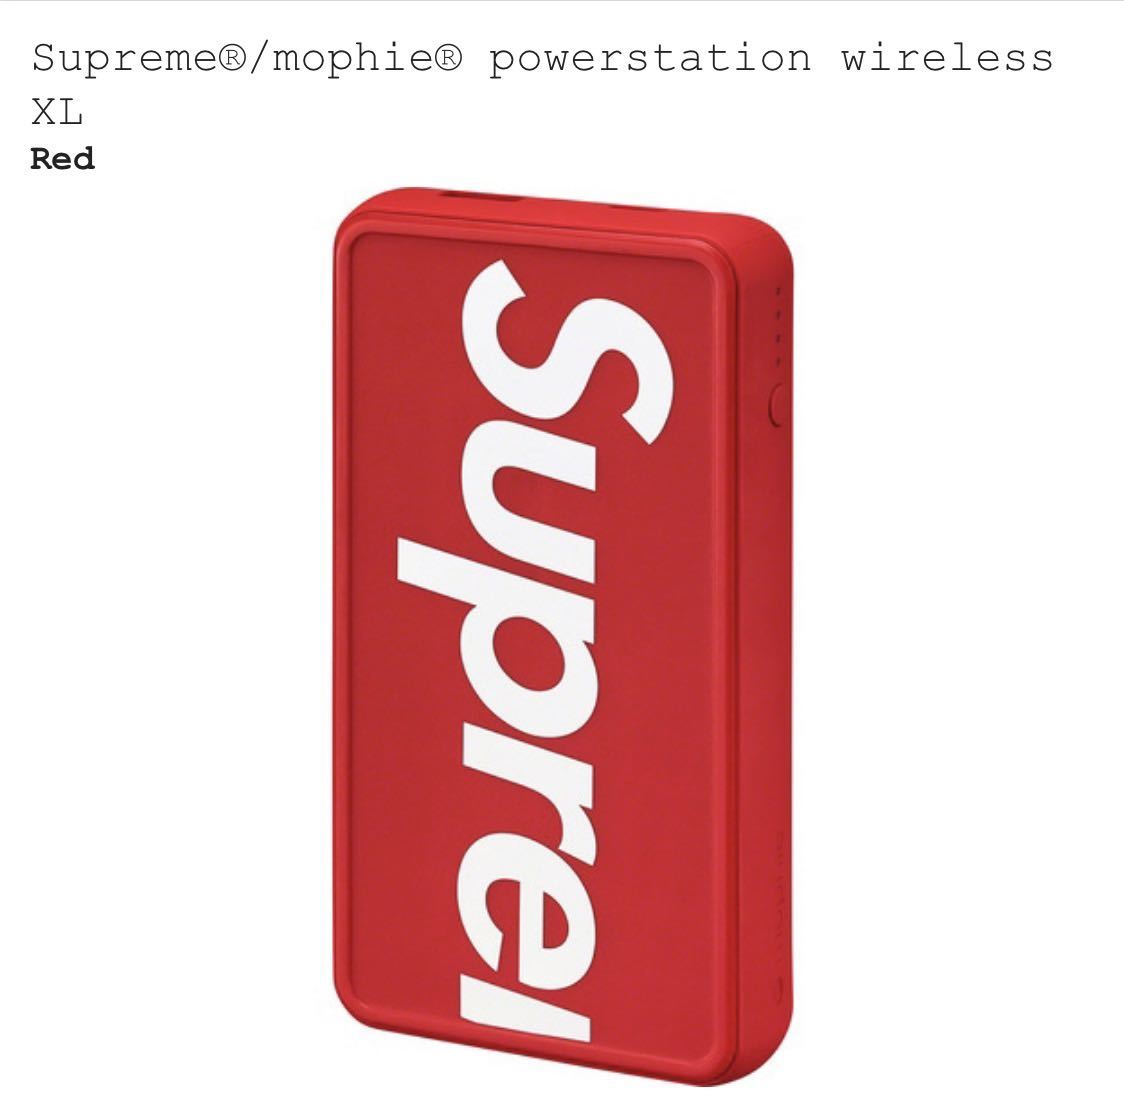 Supreme/mophie powerstation wireless XL Redレッド バッテリー